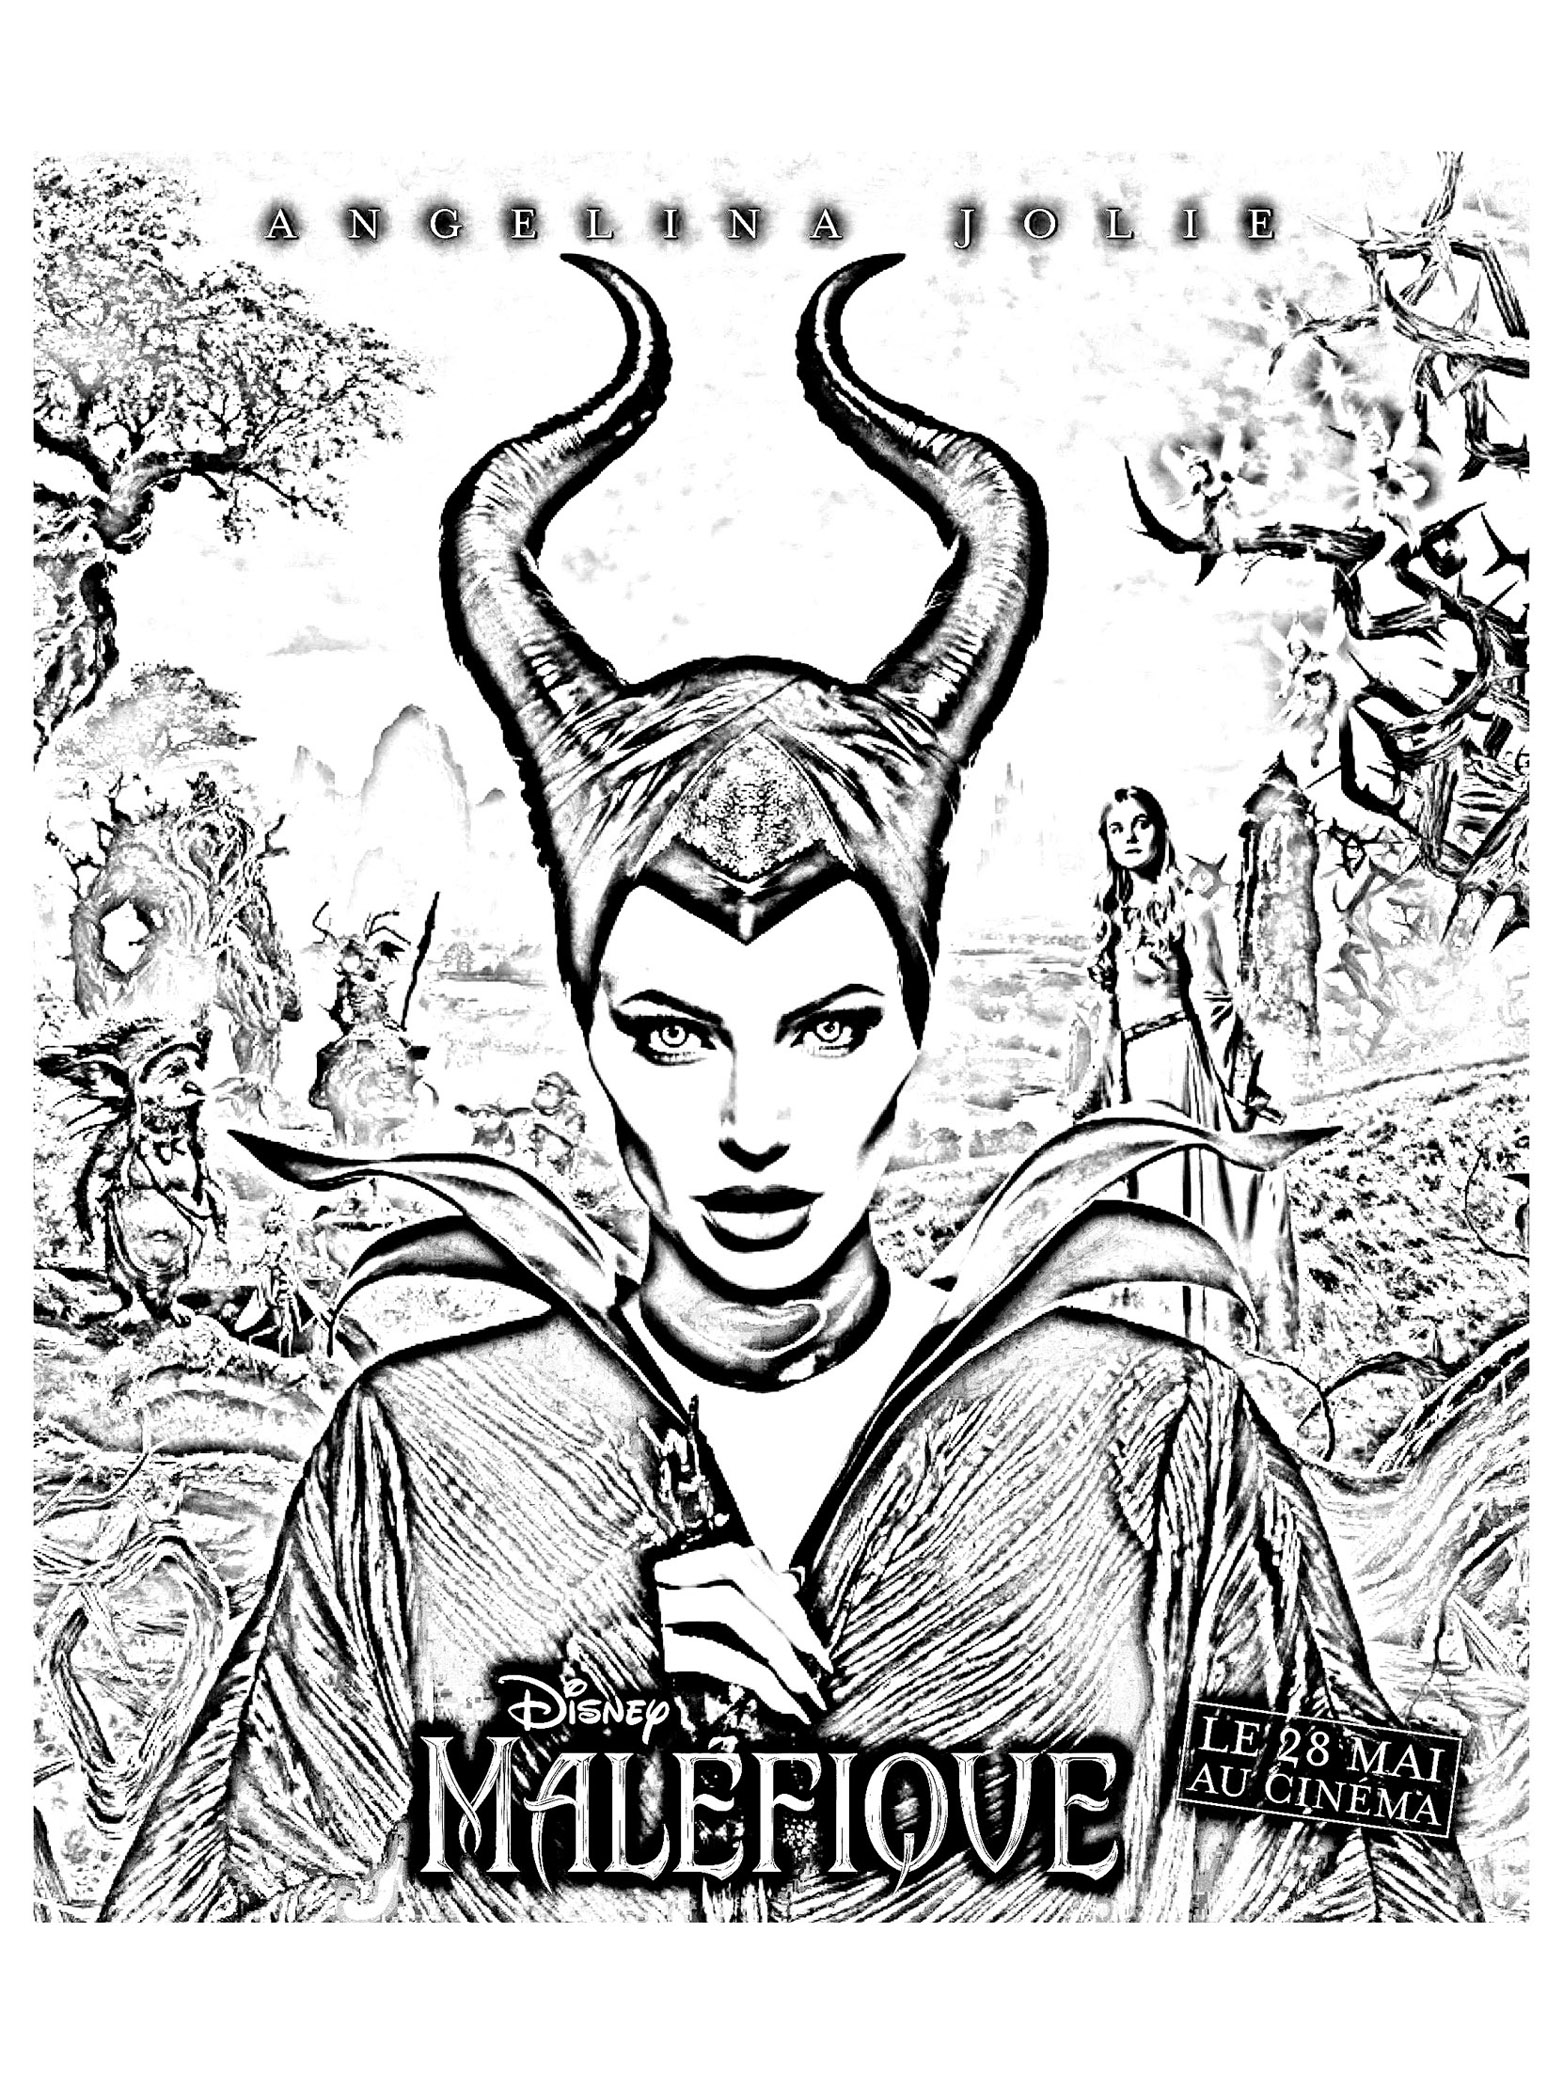 Coloring from the movie poster of the Disney movie Maleficent